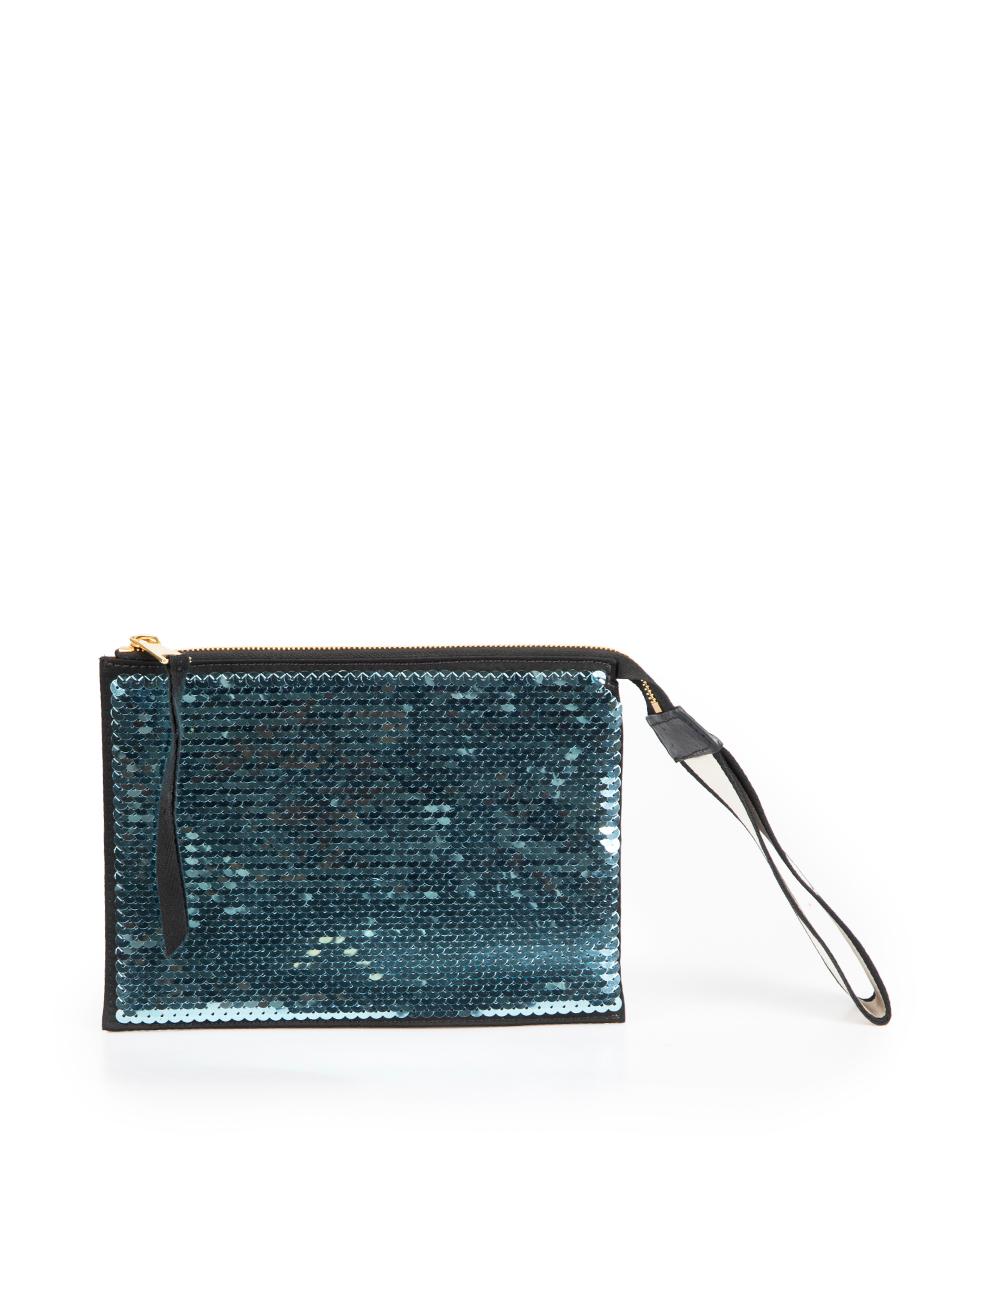 CONDITION is Very good. Minimal wear to pouch is evident. Minimal wear to the lining and wrist strap with discoloured marks on this used Nº21 designer resale item.

Details
Blue and green
Sequin
Mini clutch bag
Wristlet strap
1x Main zipped